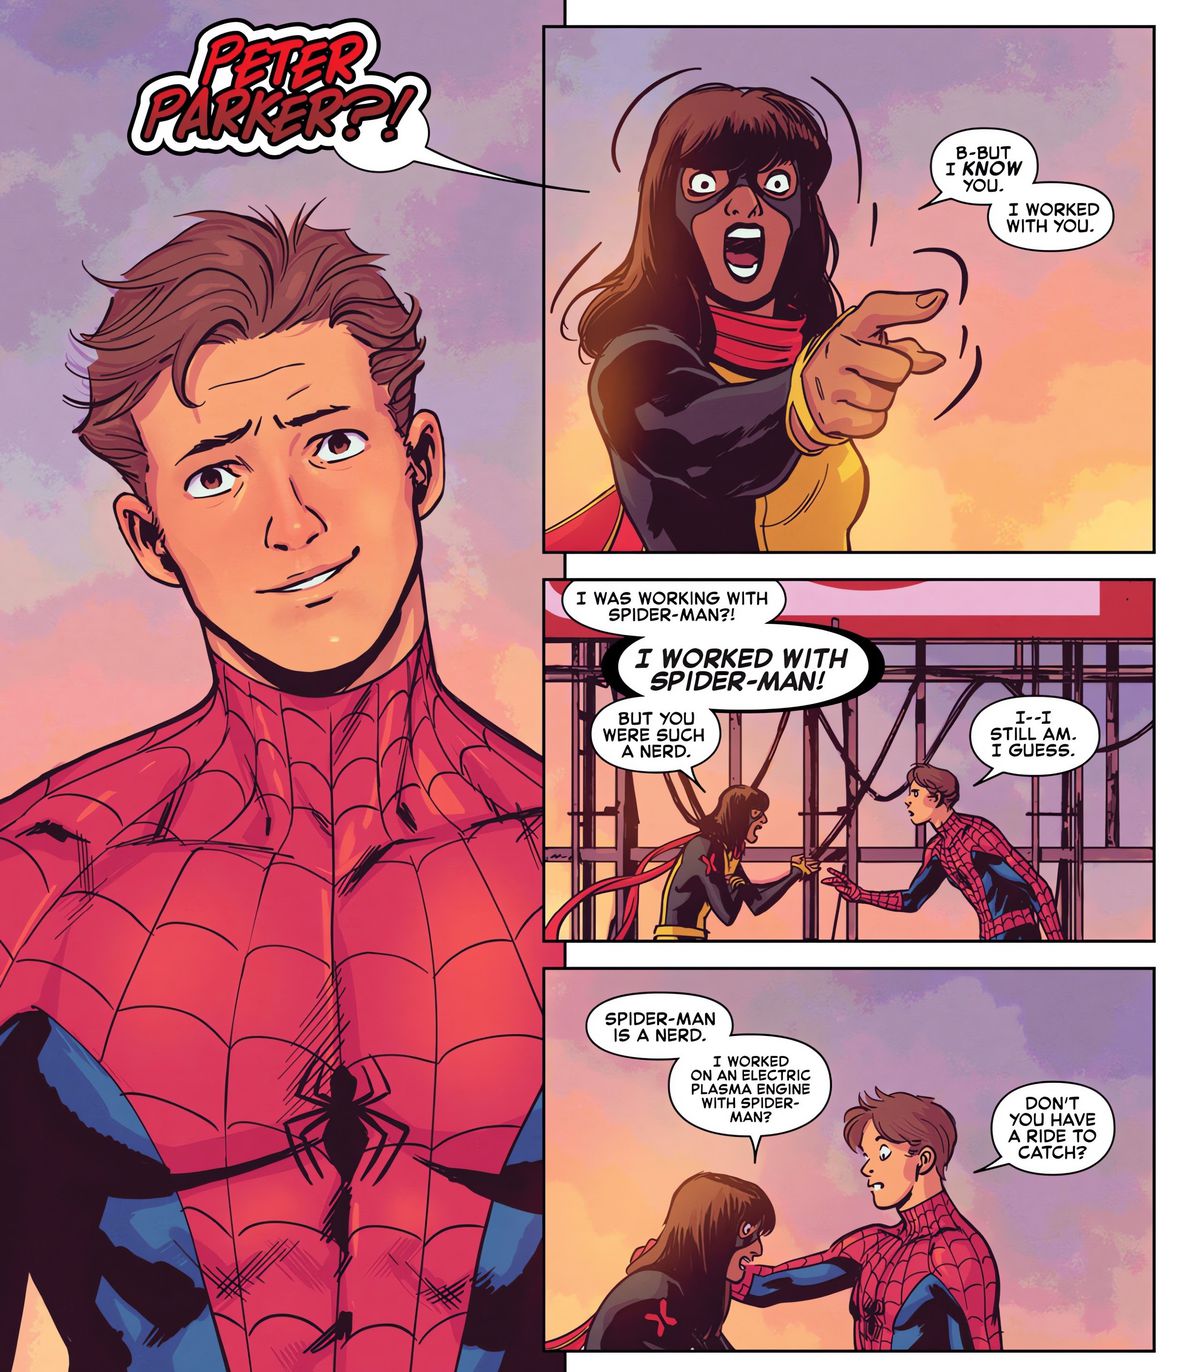 “I worked with Spider-Man!” Ms. Marvel exclaims, upon seeing Peter Parker’s face. “But you were such a nerd. Spider-Man is a nerd,” in The Amazing Spider-Man #31 (2023).